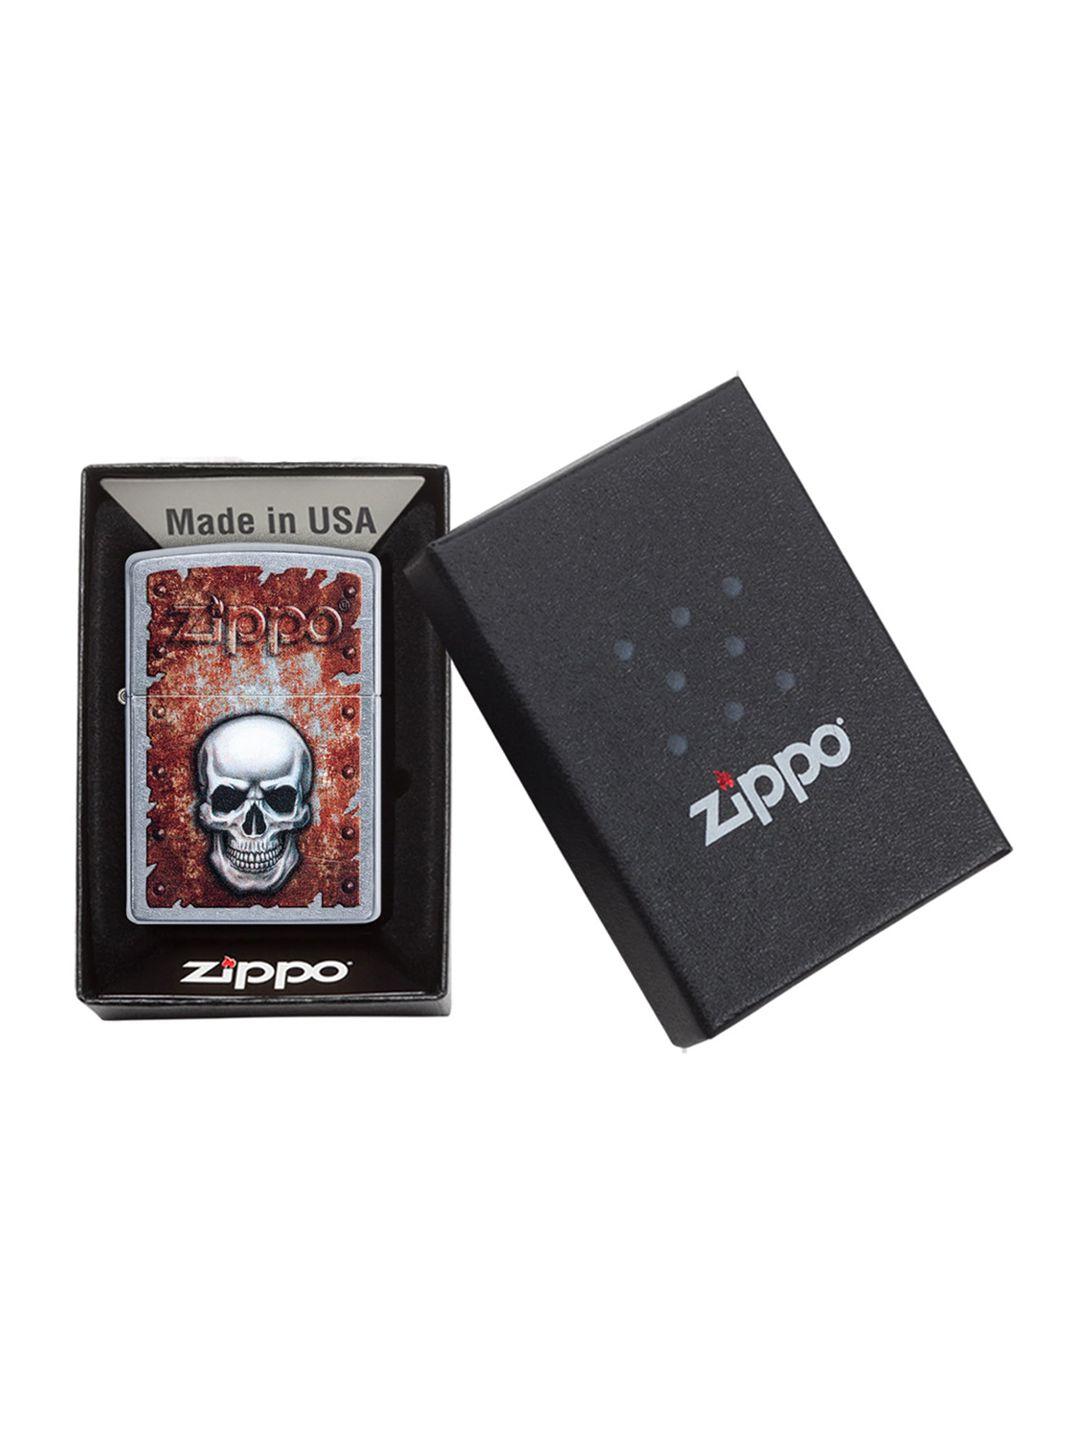 zippo silver-toned & brown filigree flame and wind design street chrome pocket lighter